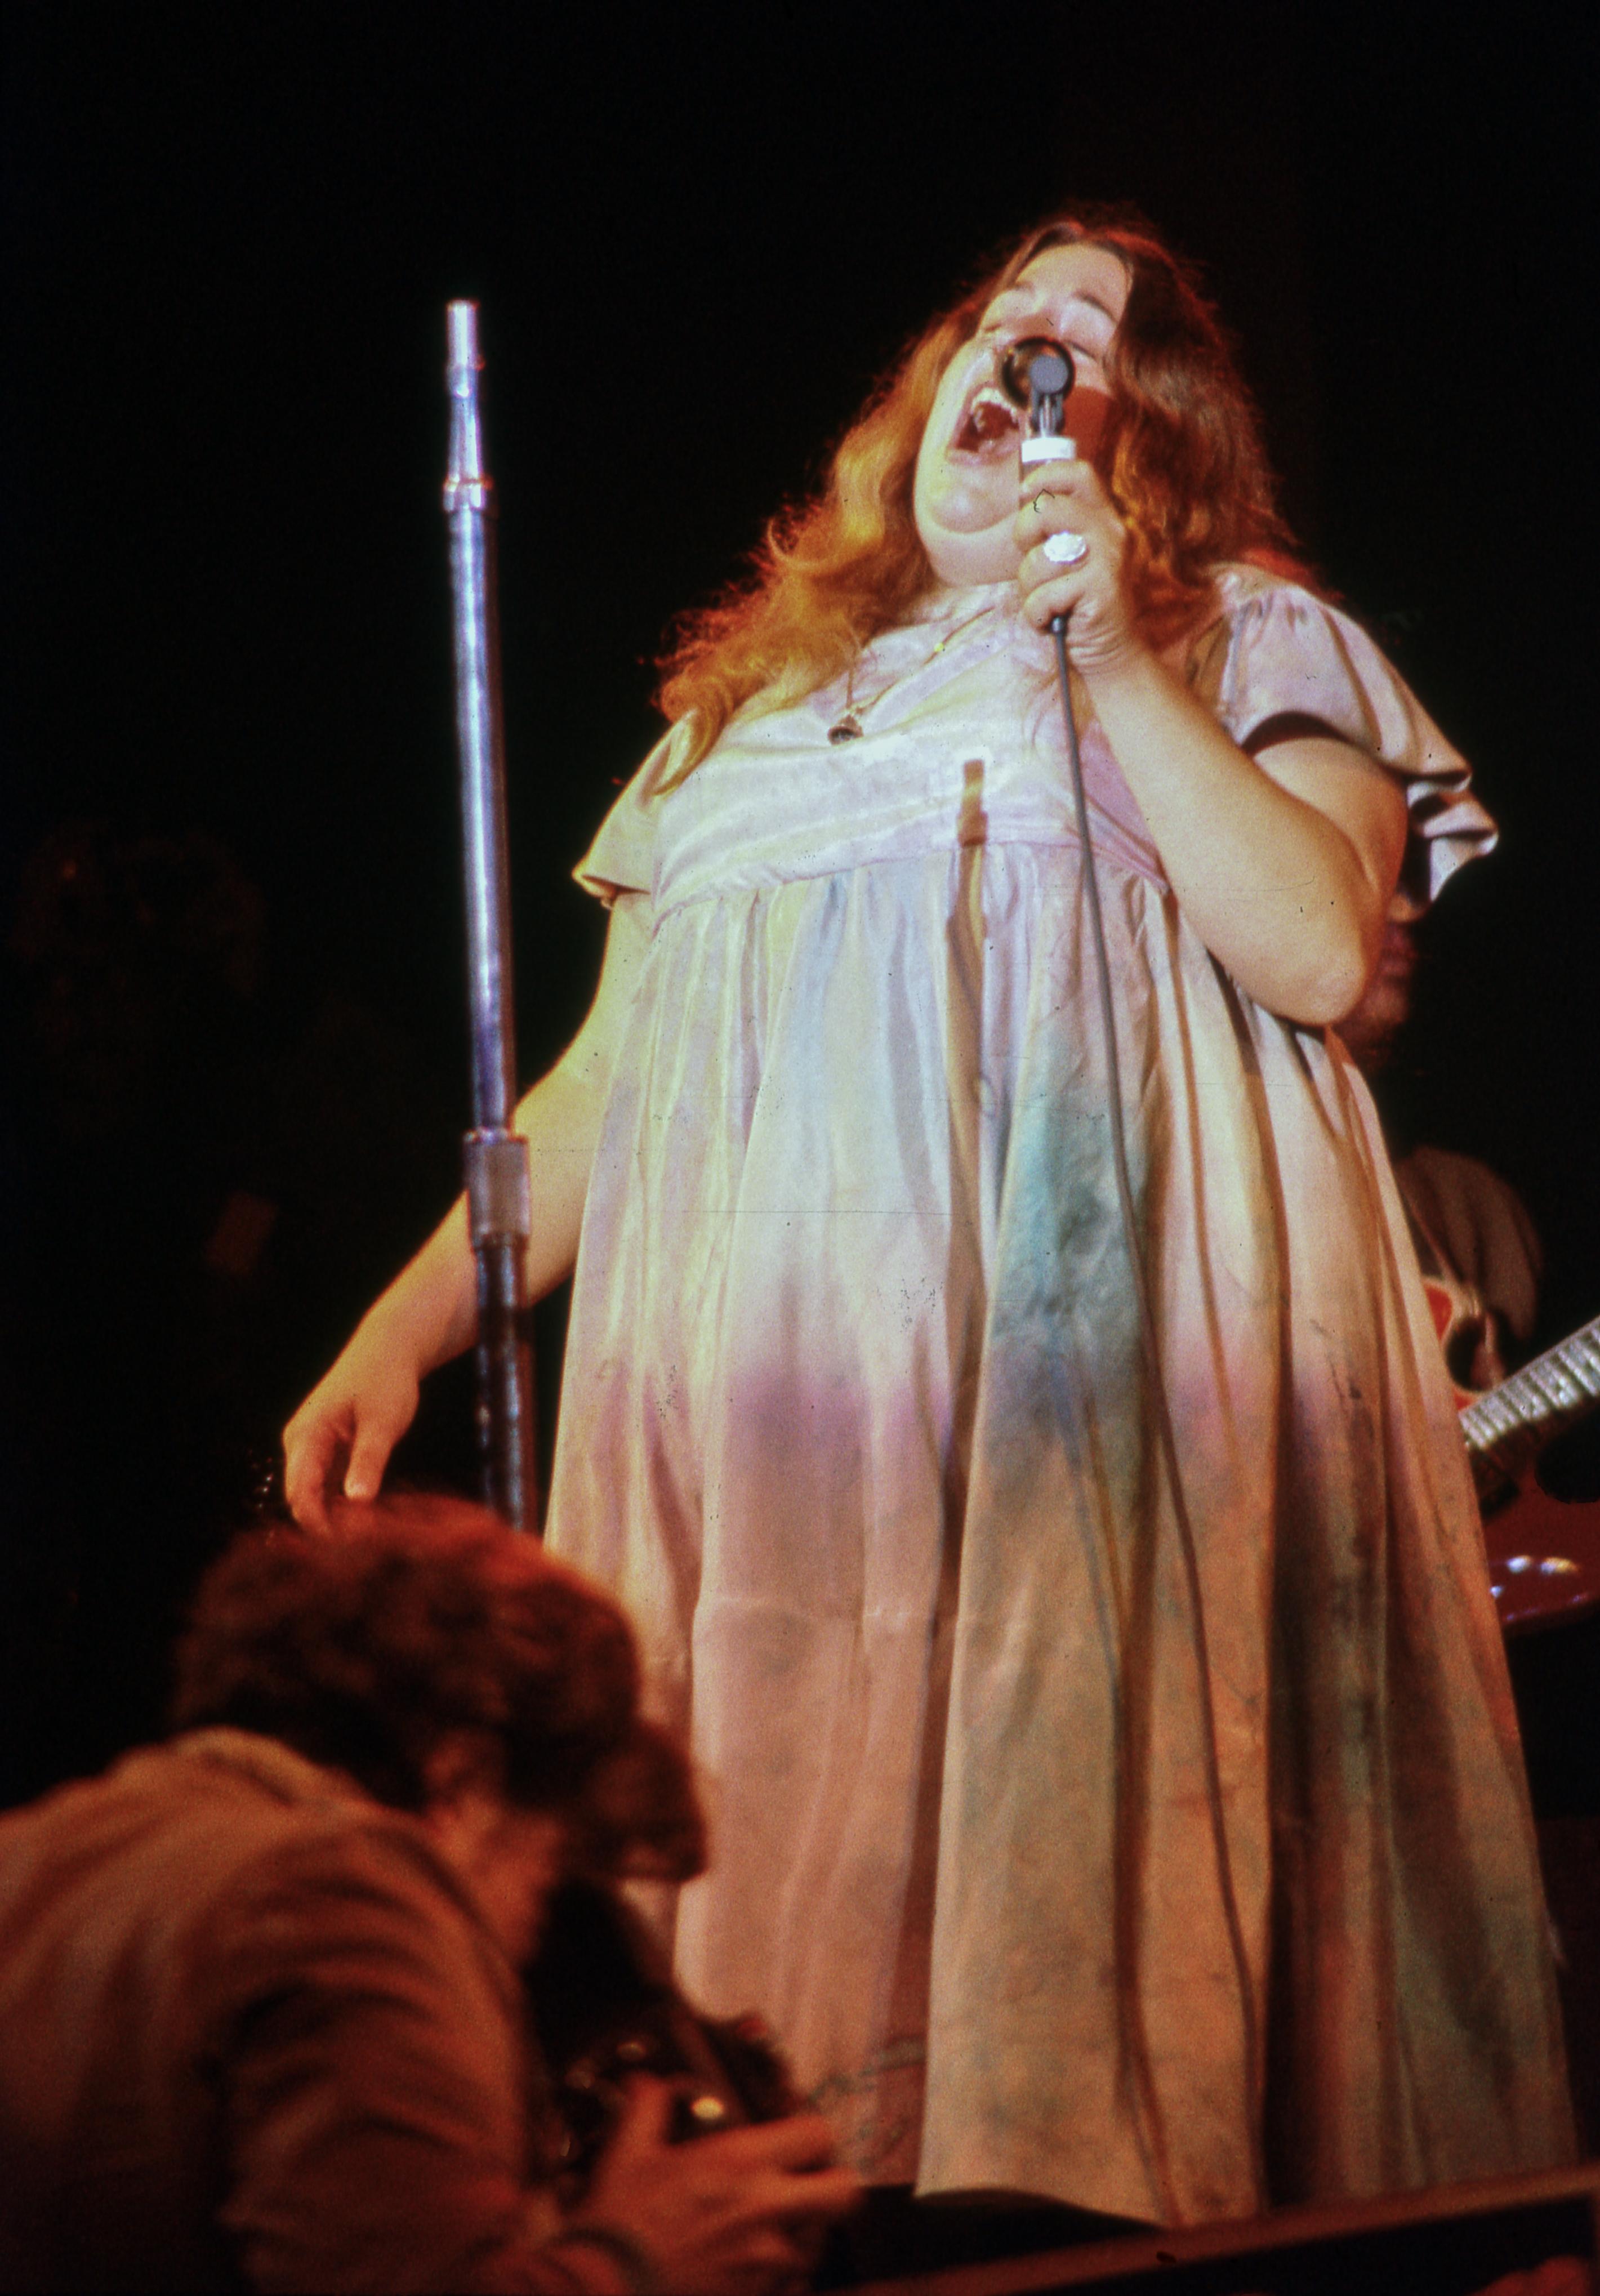 Jill Gibson Color Photograph - Mama Cass Performing on Stage at Monterey Pop Festival Fine Art Print